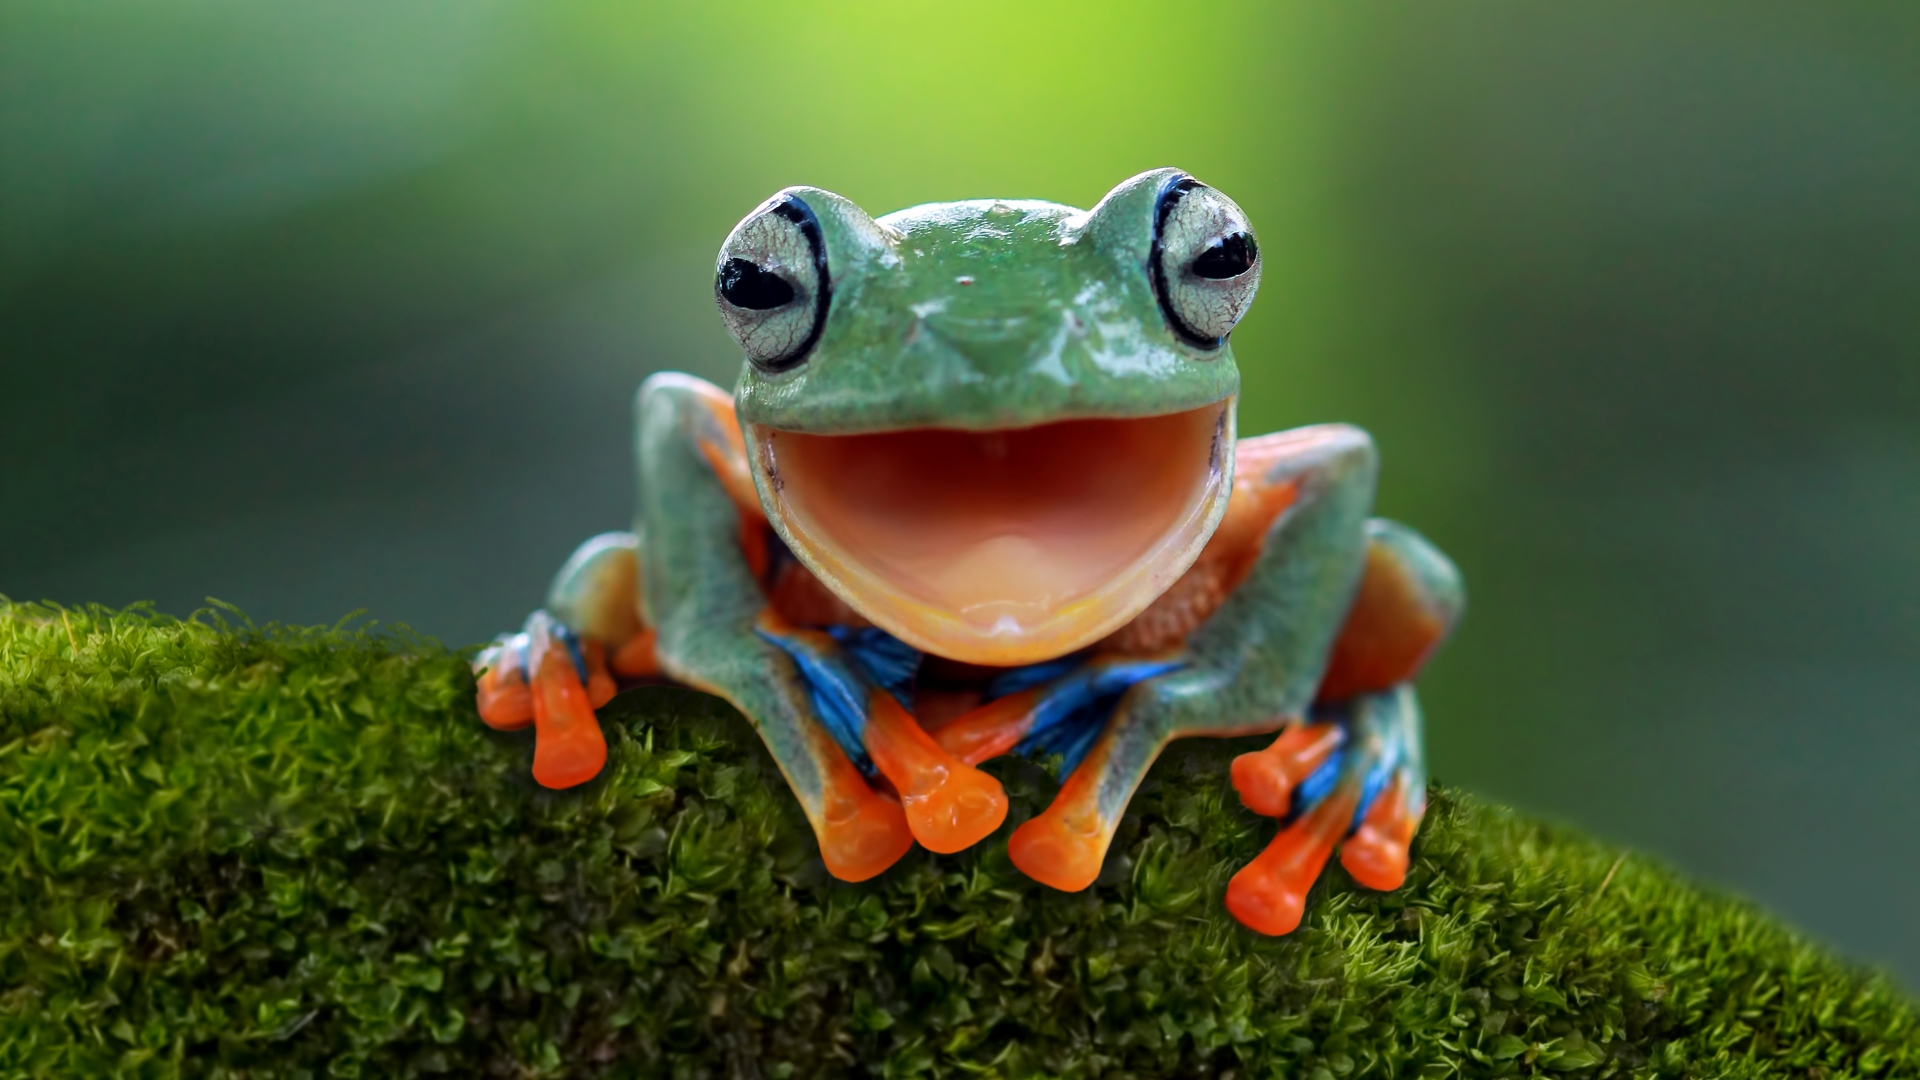 Frogs: The largest group of amphibians | Live Science